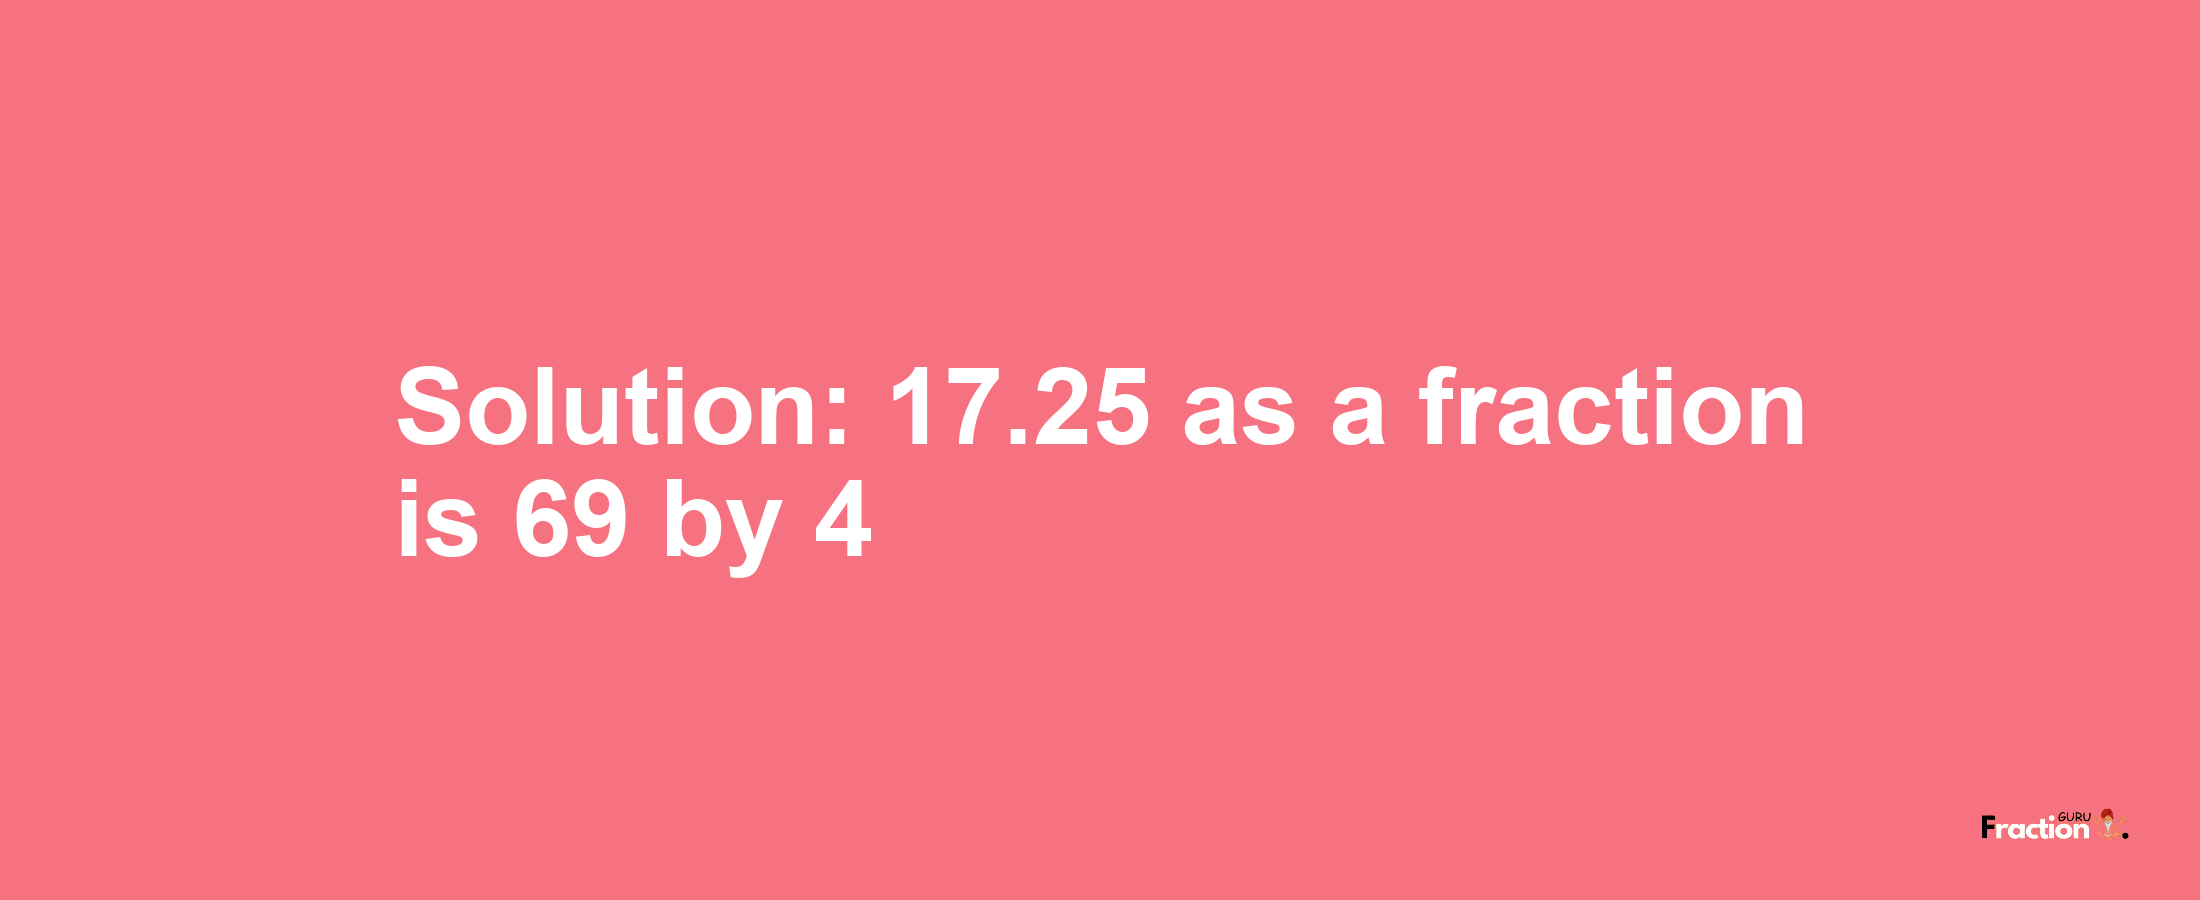 Solution:17.25 as a fraction is 69/4